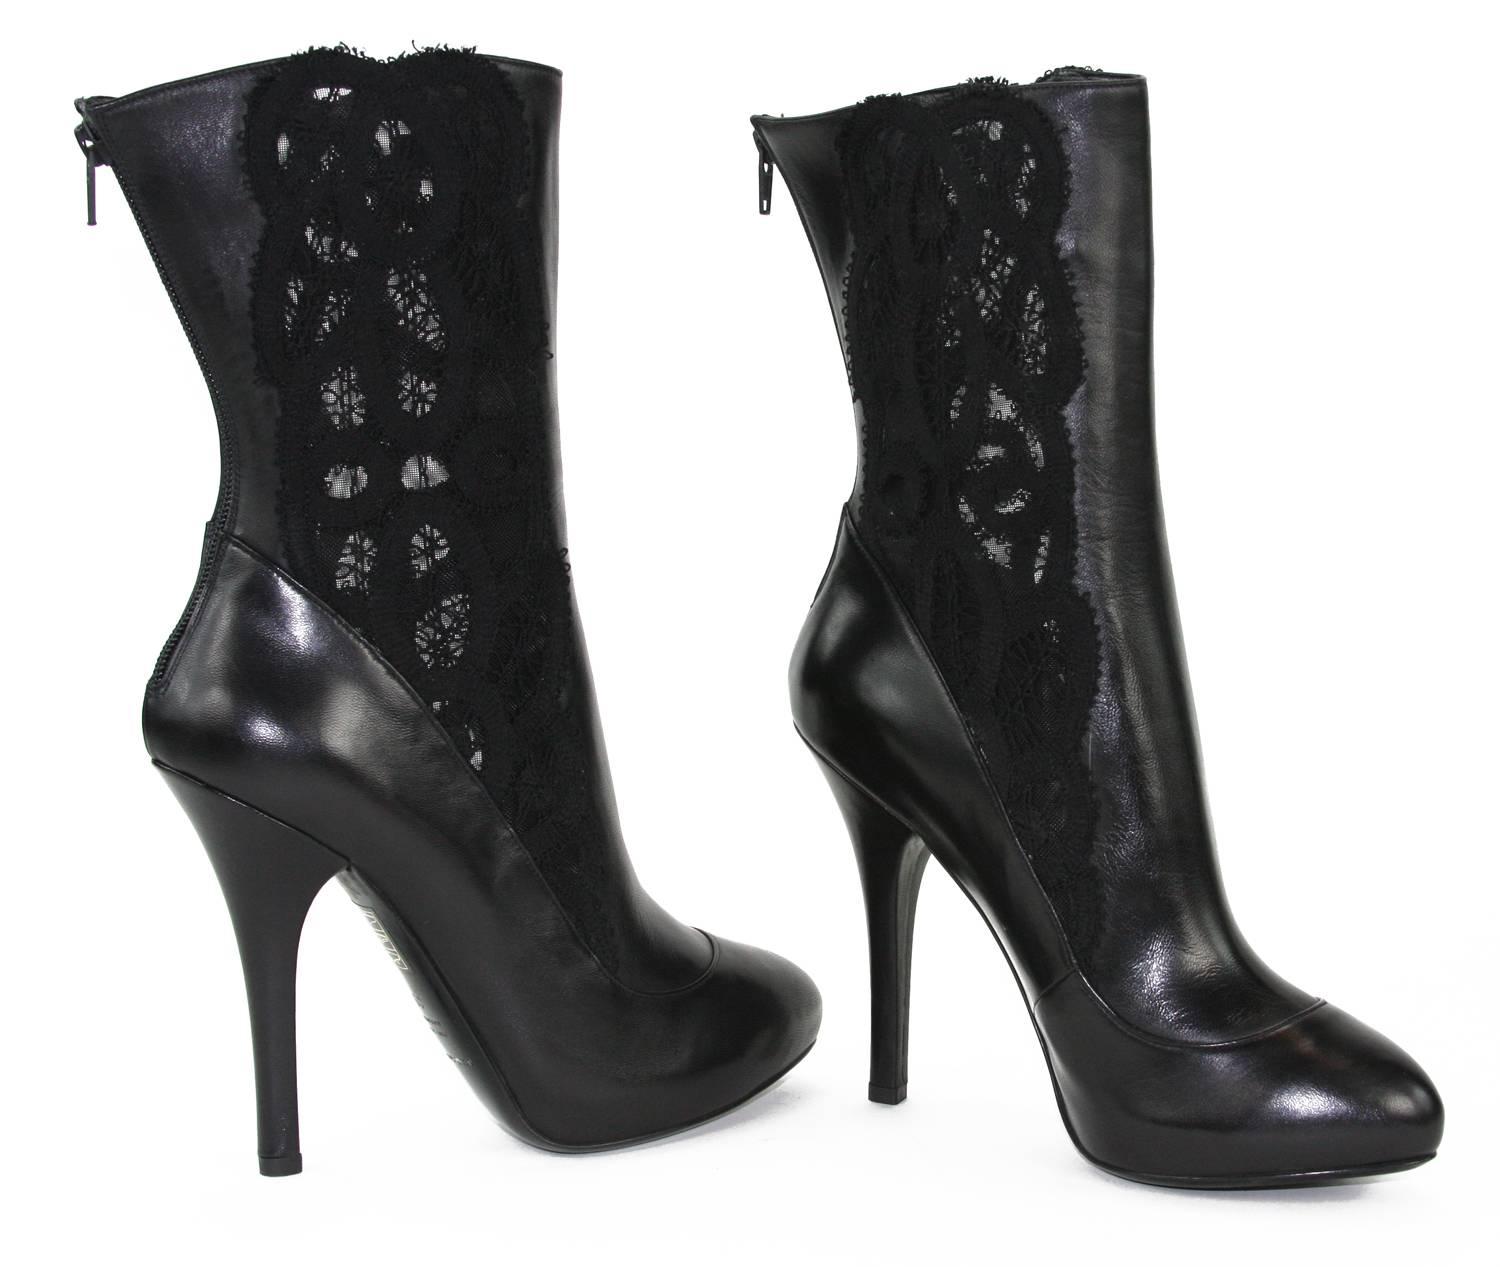 When creating the perfect outfit, always start off on the right foot with a pair of stunning boots from Dolce & Gabbana.
Dolce & Gabbana Black Lace inset Leather Platform Boots
Italian size 39 - US 9
Color - Black
Smooth Leather and Lace